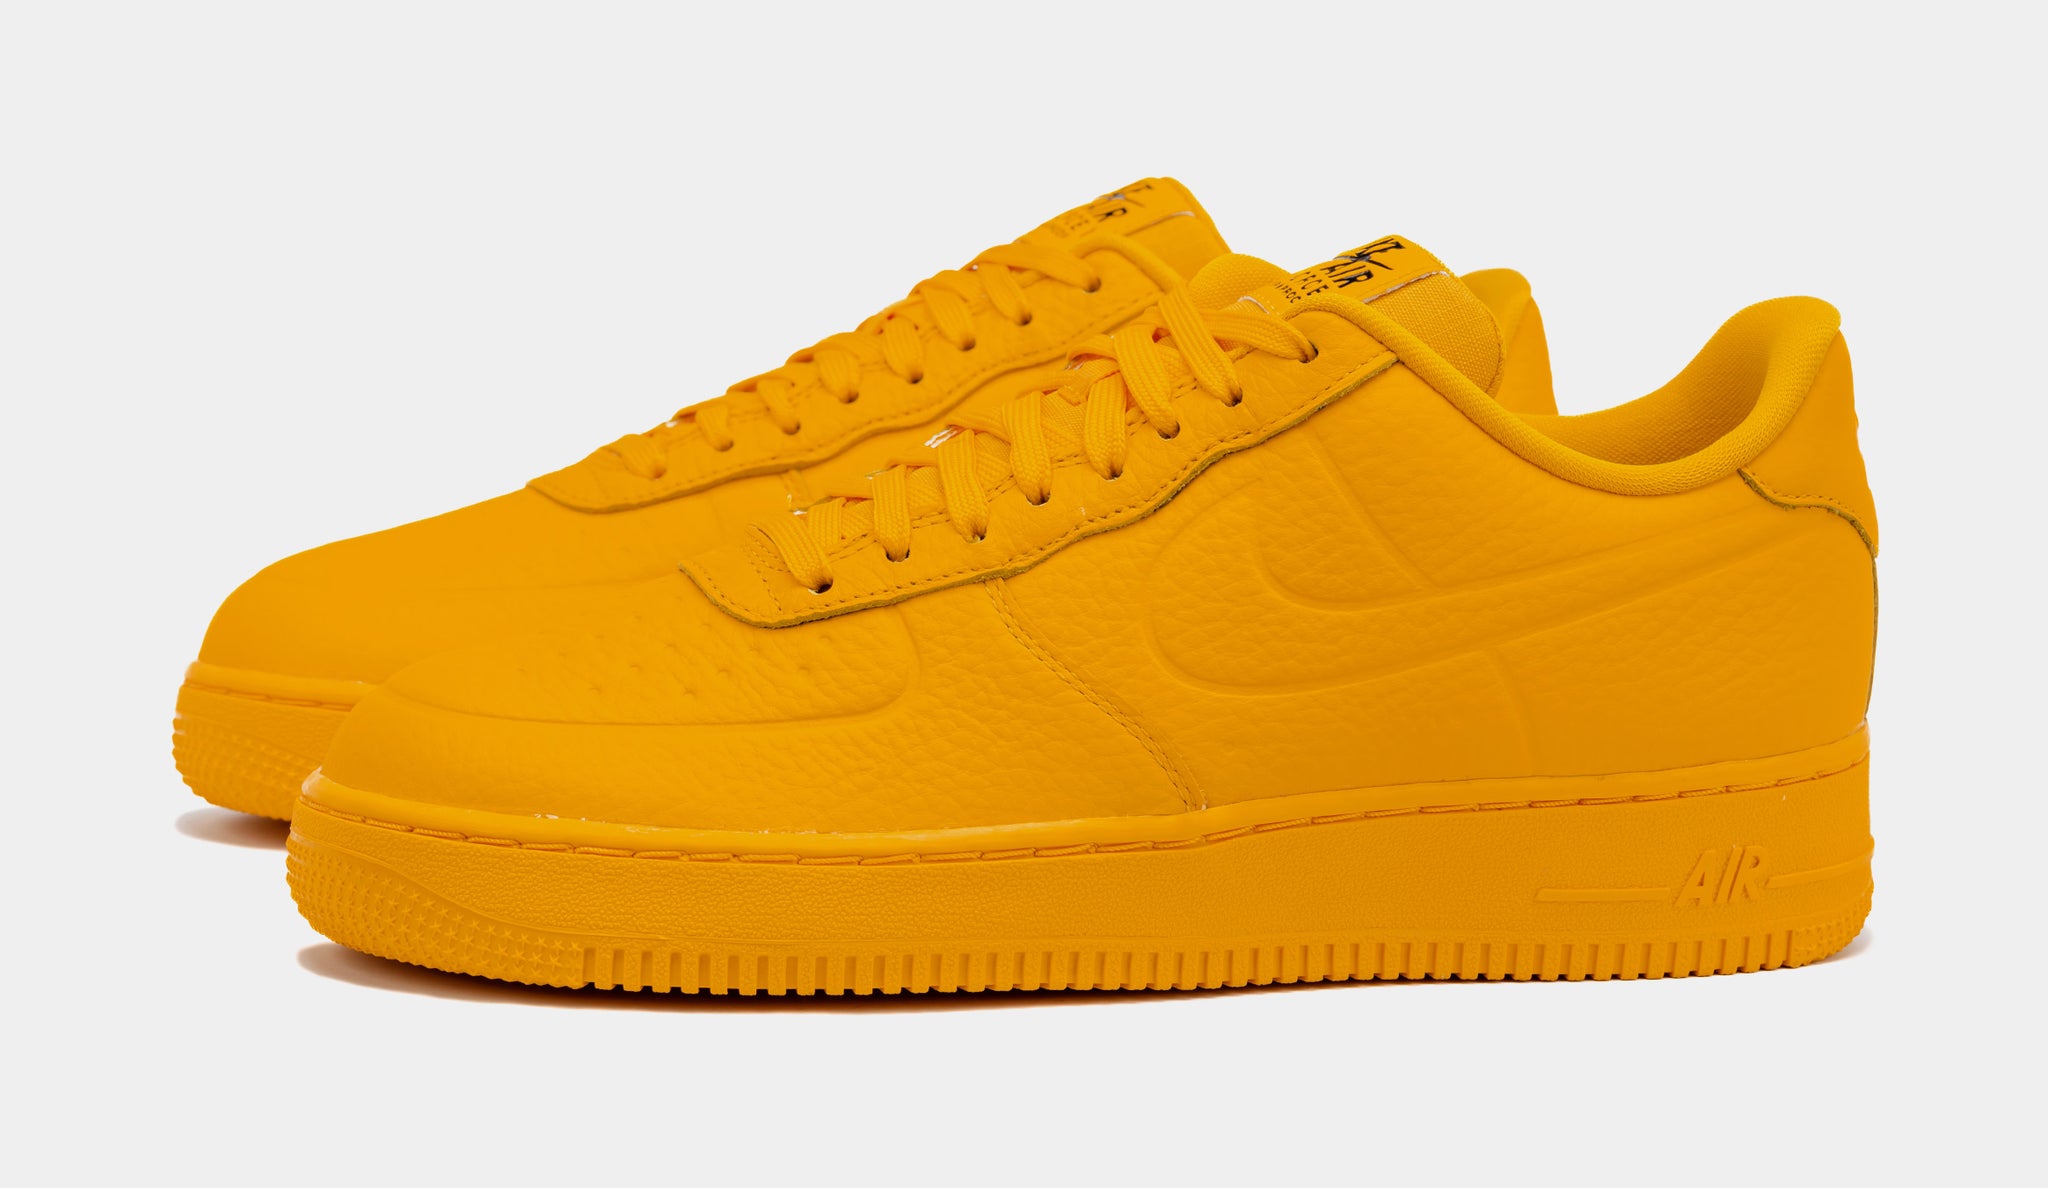 university gold air force 1